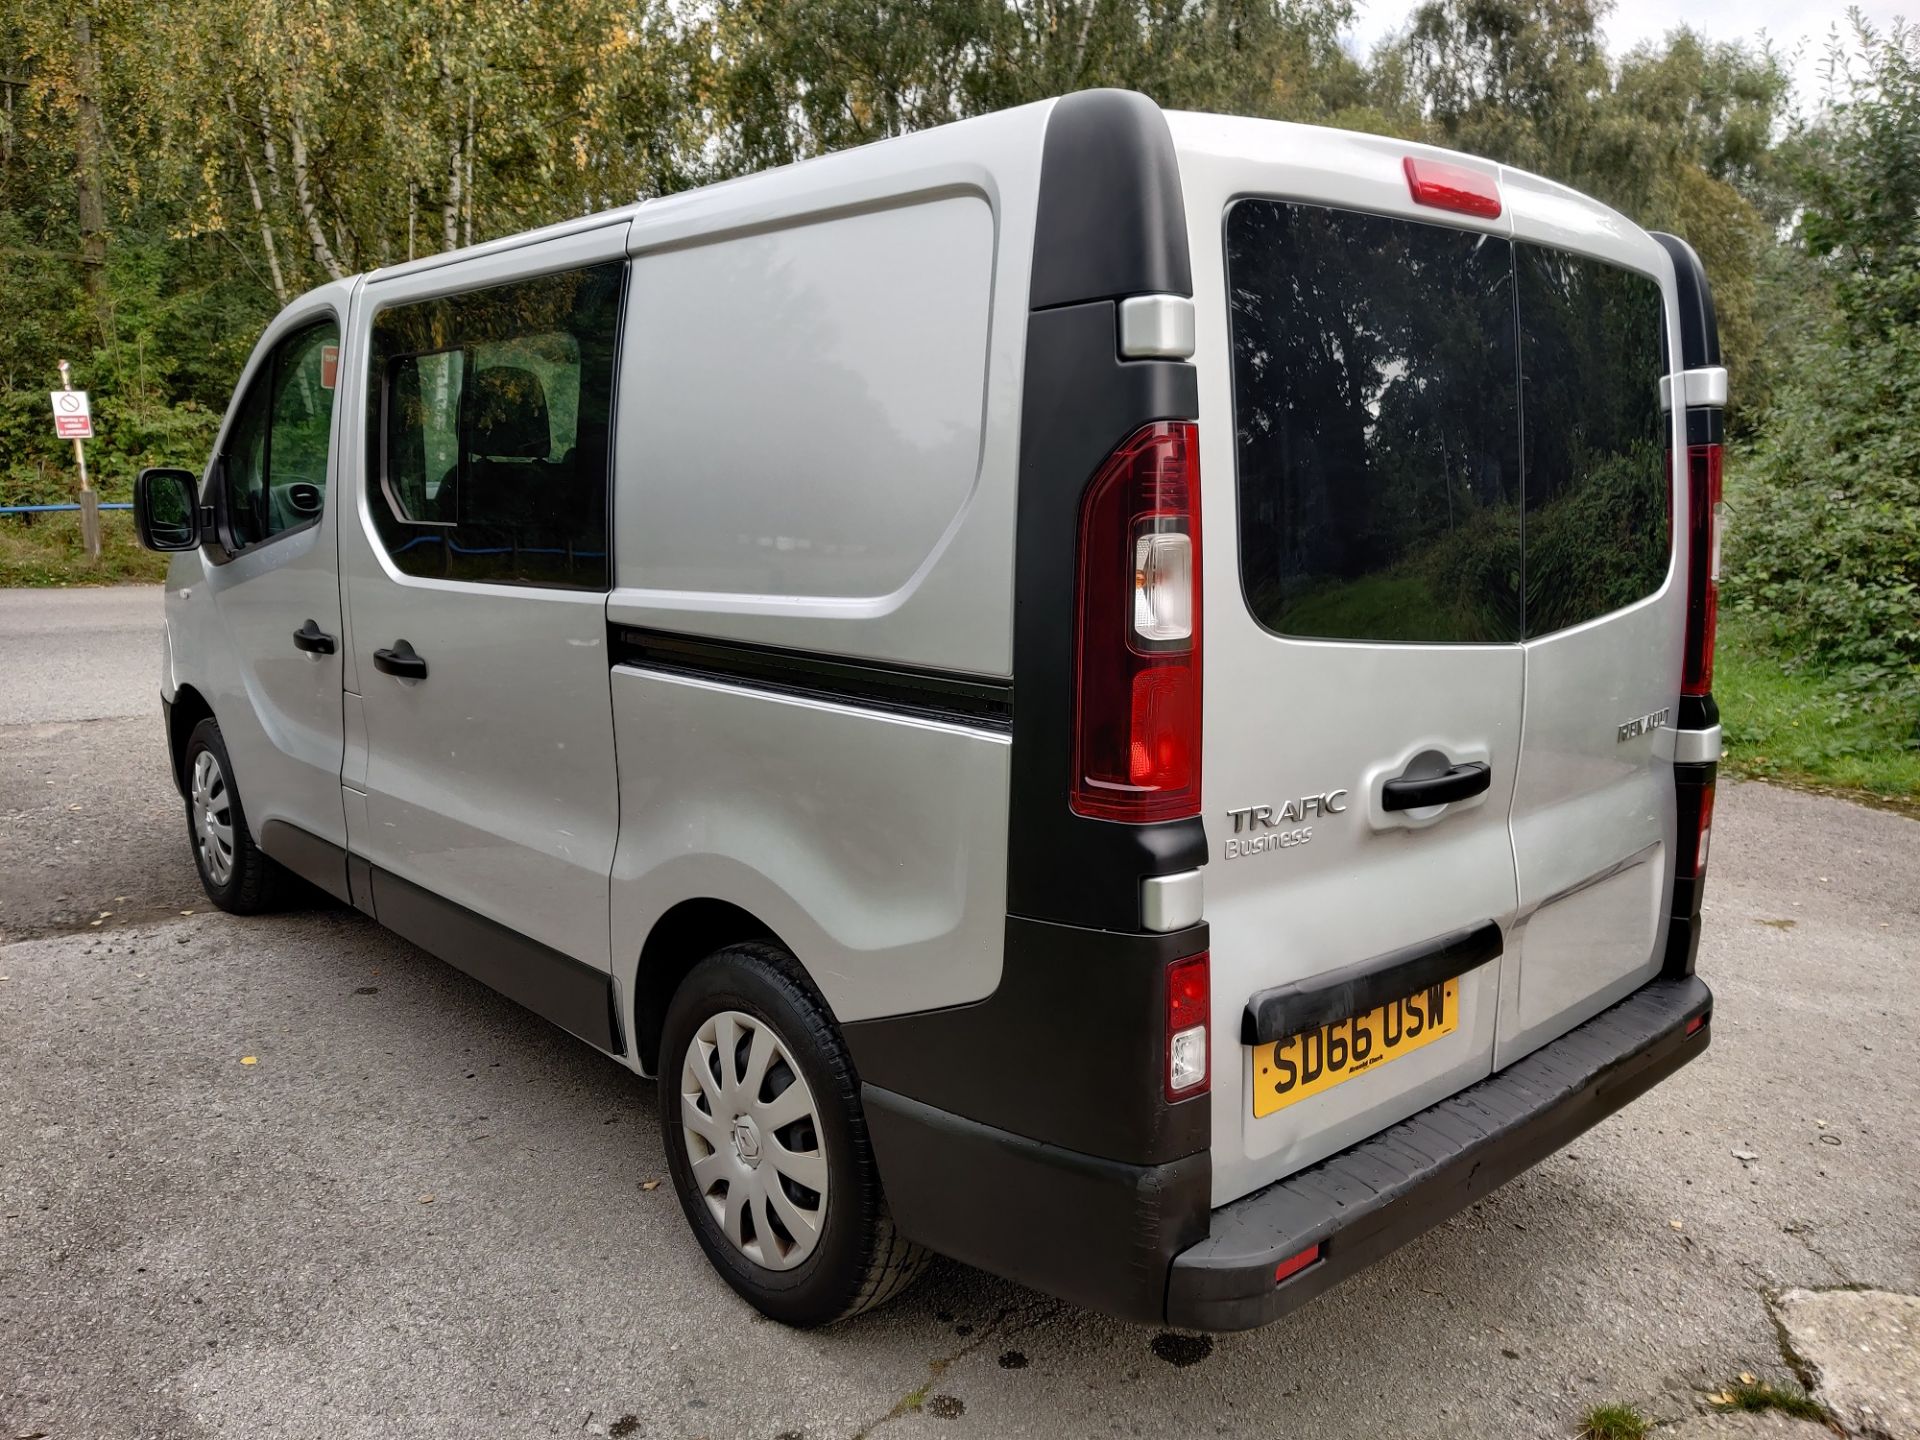 2016/66 REG RENAULT TRAFIC SL27 BUSINESS DCI 1.6 DIESEL SILVER MPV - 7 SEATER *NO VAT* - Image 4 of 16